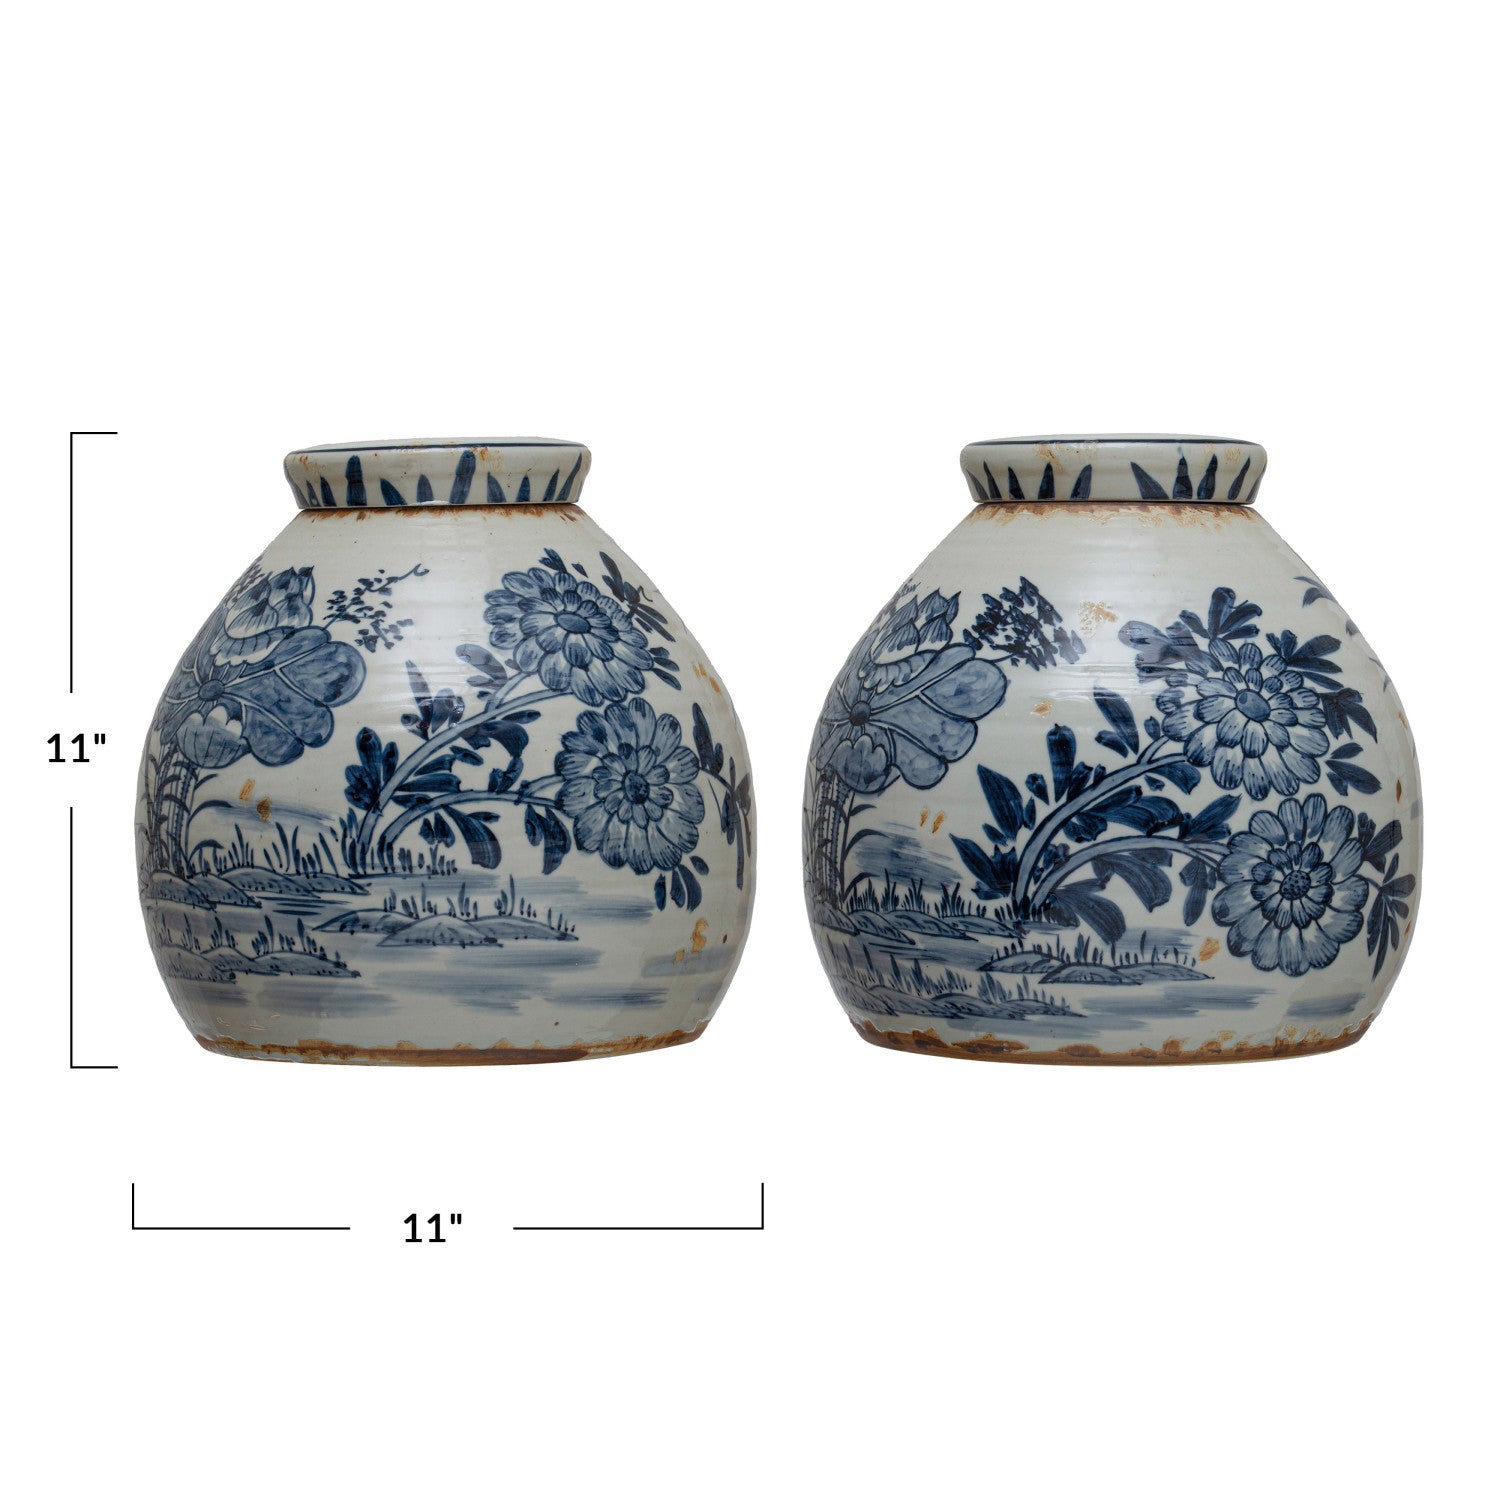 Decorative Stoneware Ginger Jar measures 11 inches high and 11 inches wide. 